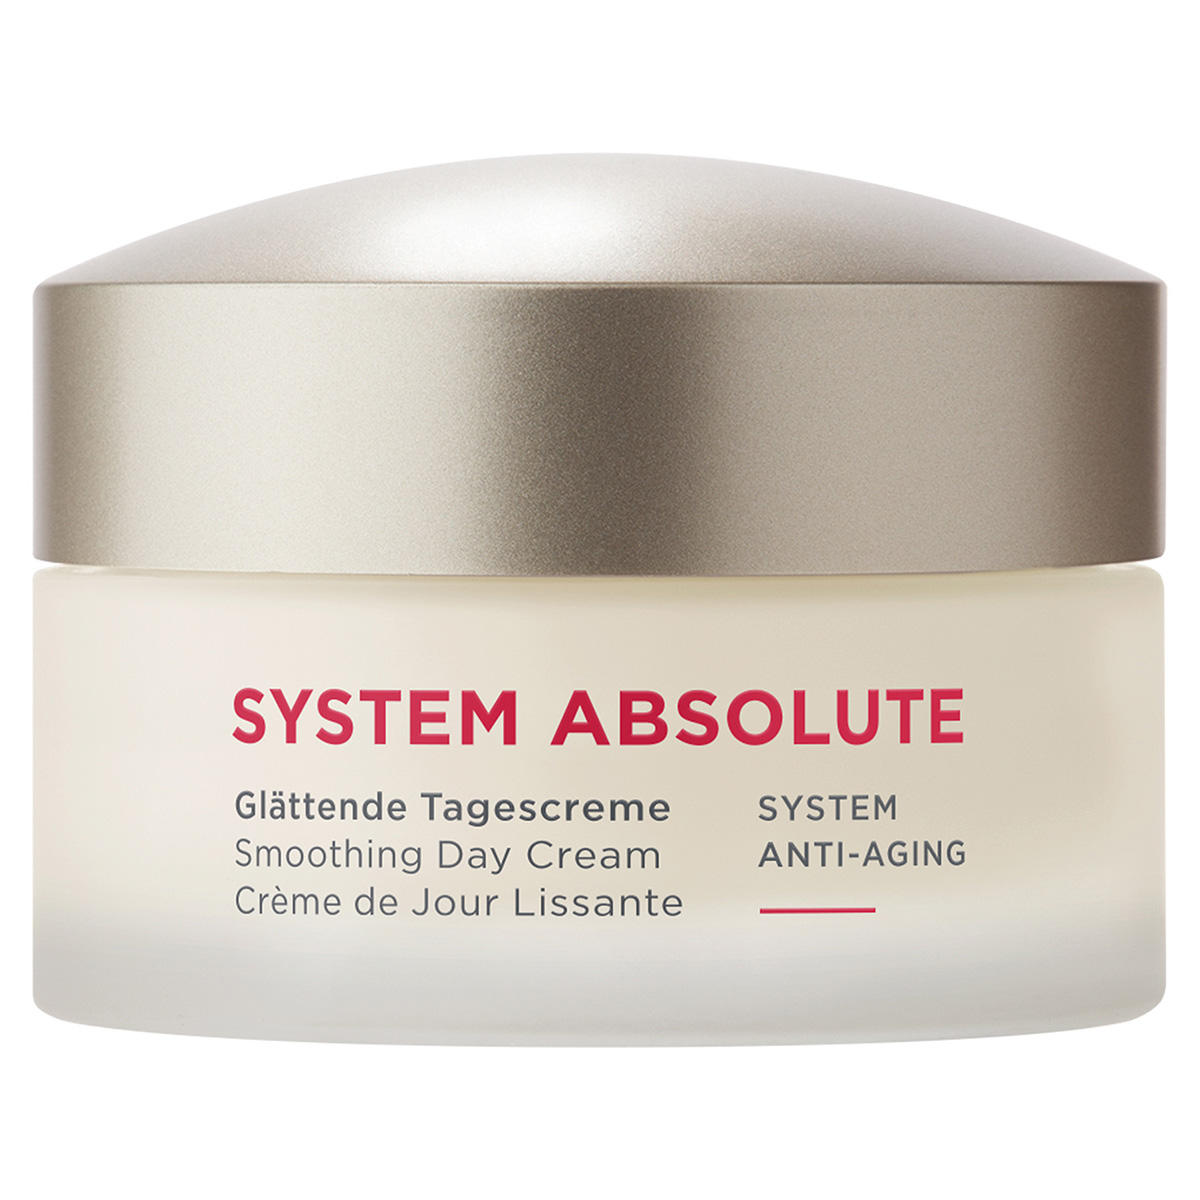 ANNEMARIE BÖRLIND SYSTEM ABSOLUTE LIMITED DESIGN Smoothing Day Cream + 2 Gift Sachets 50 ml - 1